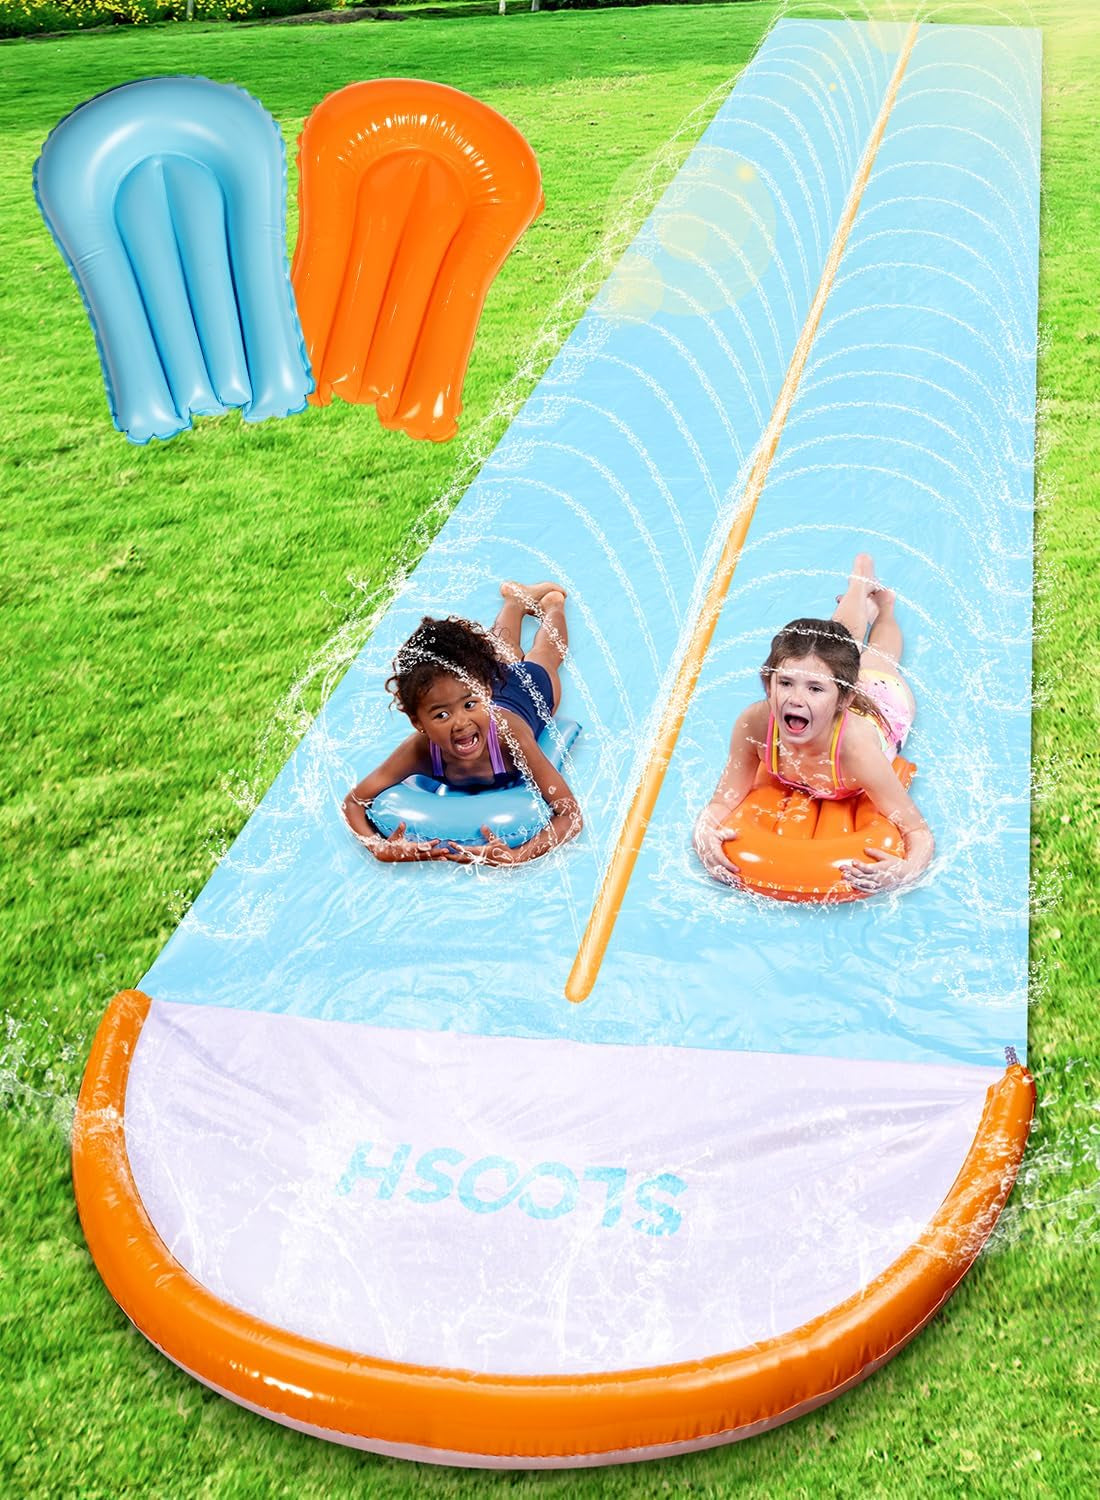 32.5Ft Extra Long Water Slide with 2 Inflatable Boards, Lawn Water Slides for Kids Adults, Double Lane Waterslide Slip Sprinkler, Backyard Summer Outdoor Water Toy